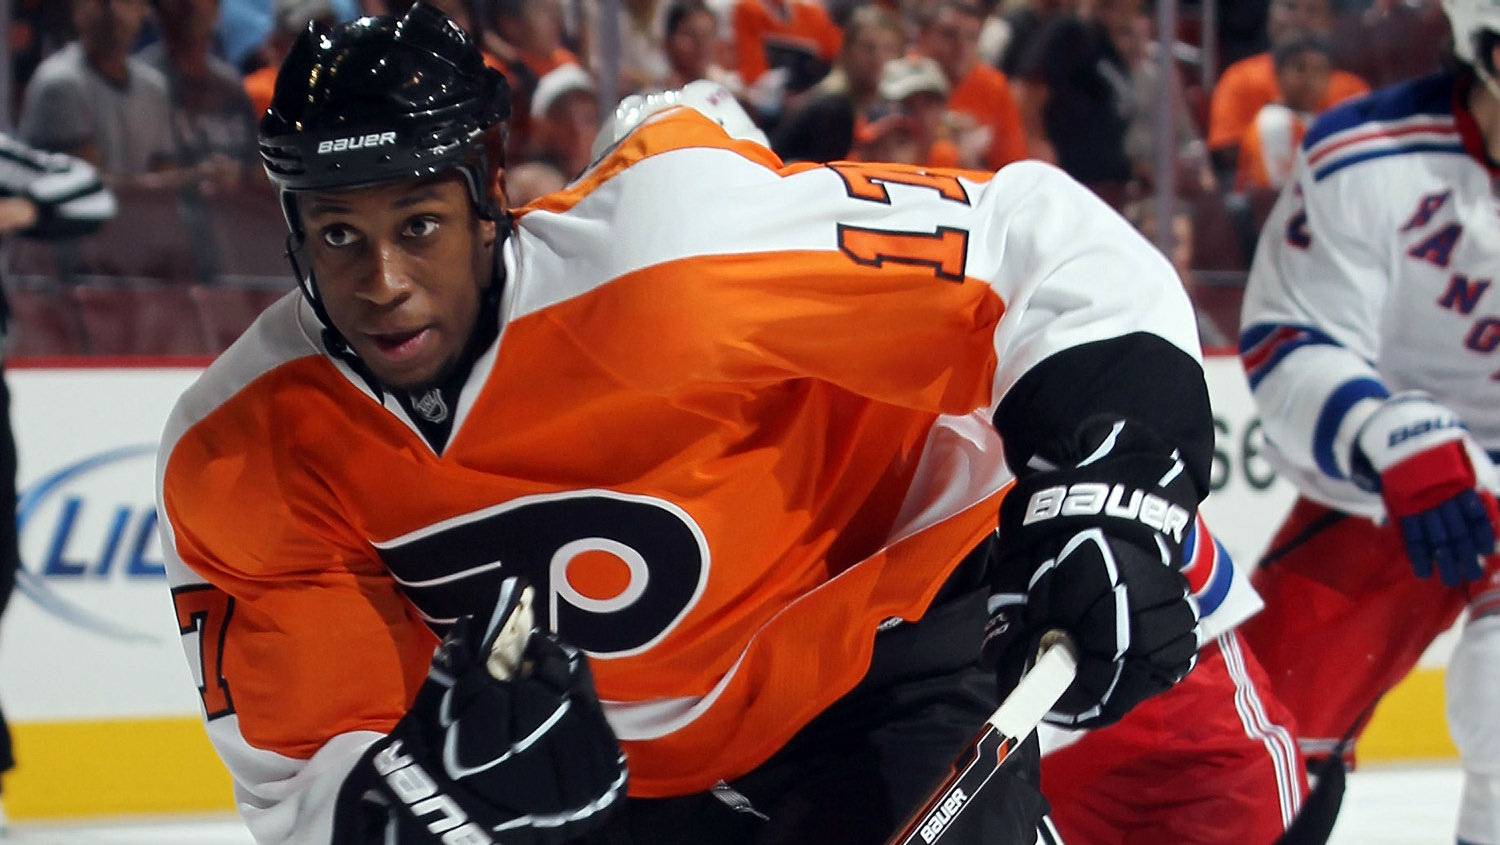 Flyers star Wayne Simmonds says conversation needs to return to the real  problem – racism and social injustice – New York Daily News